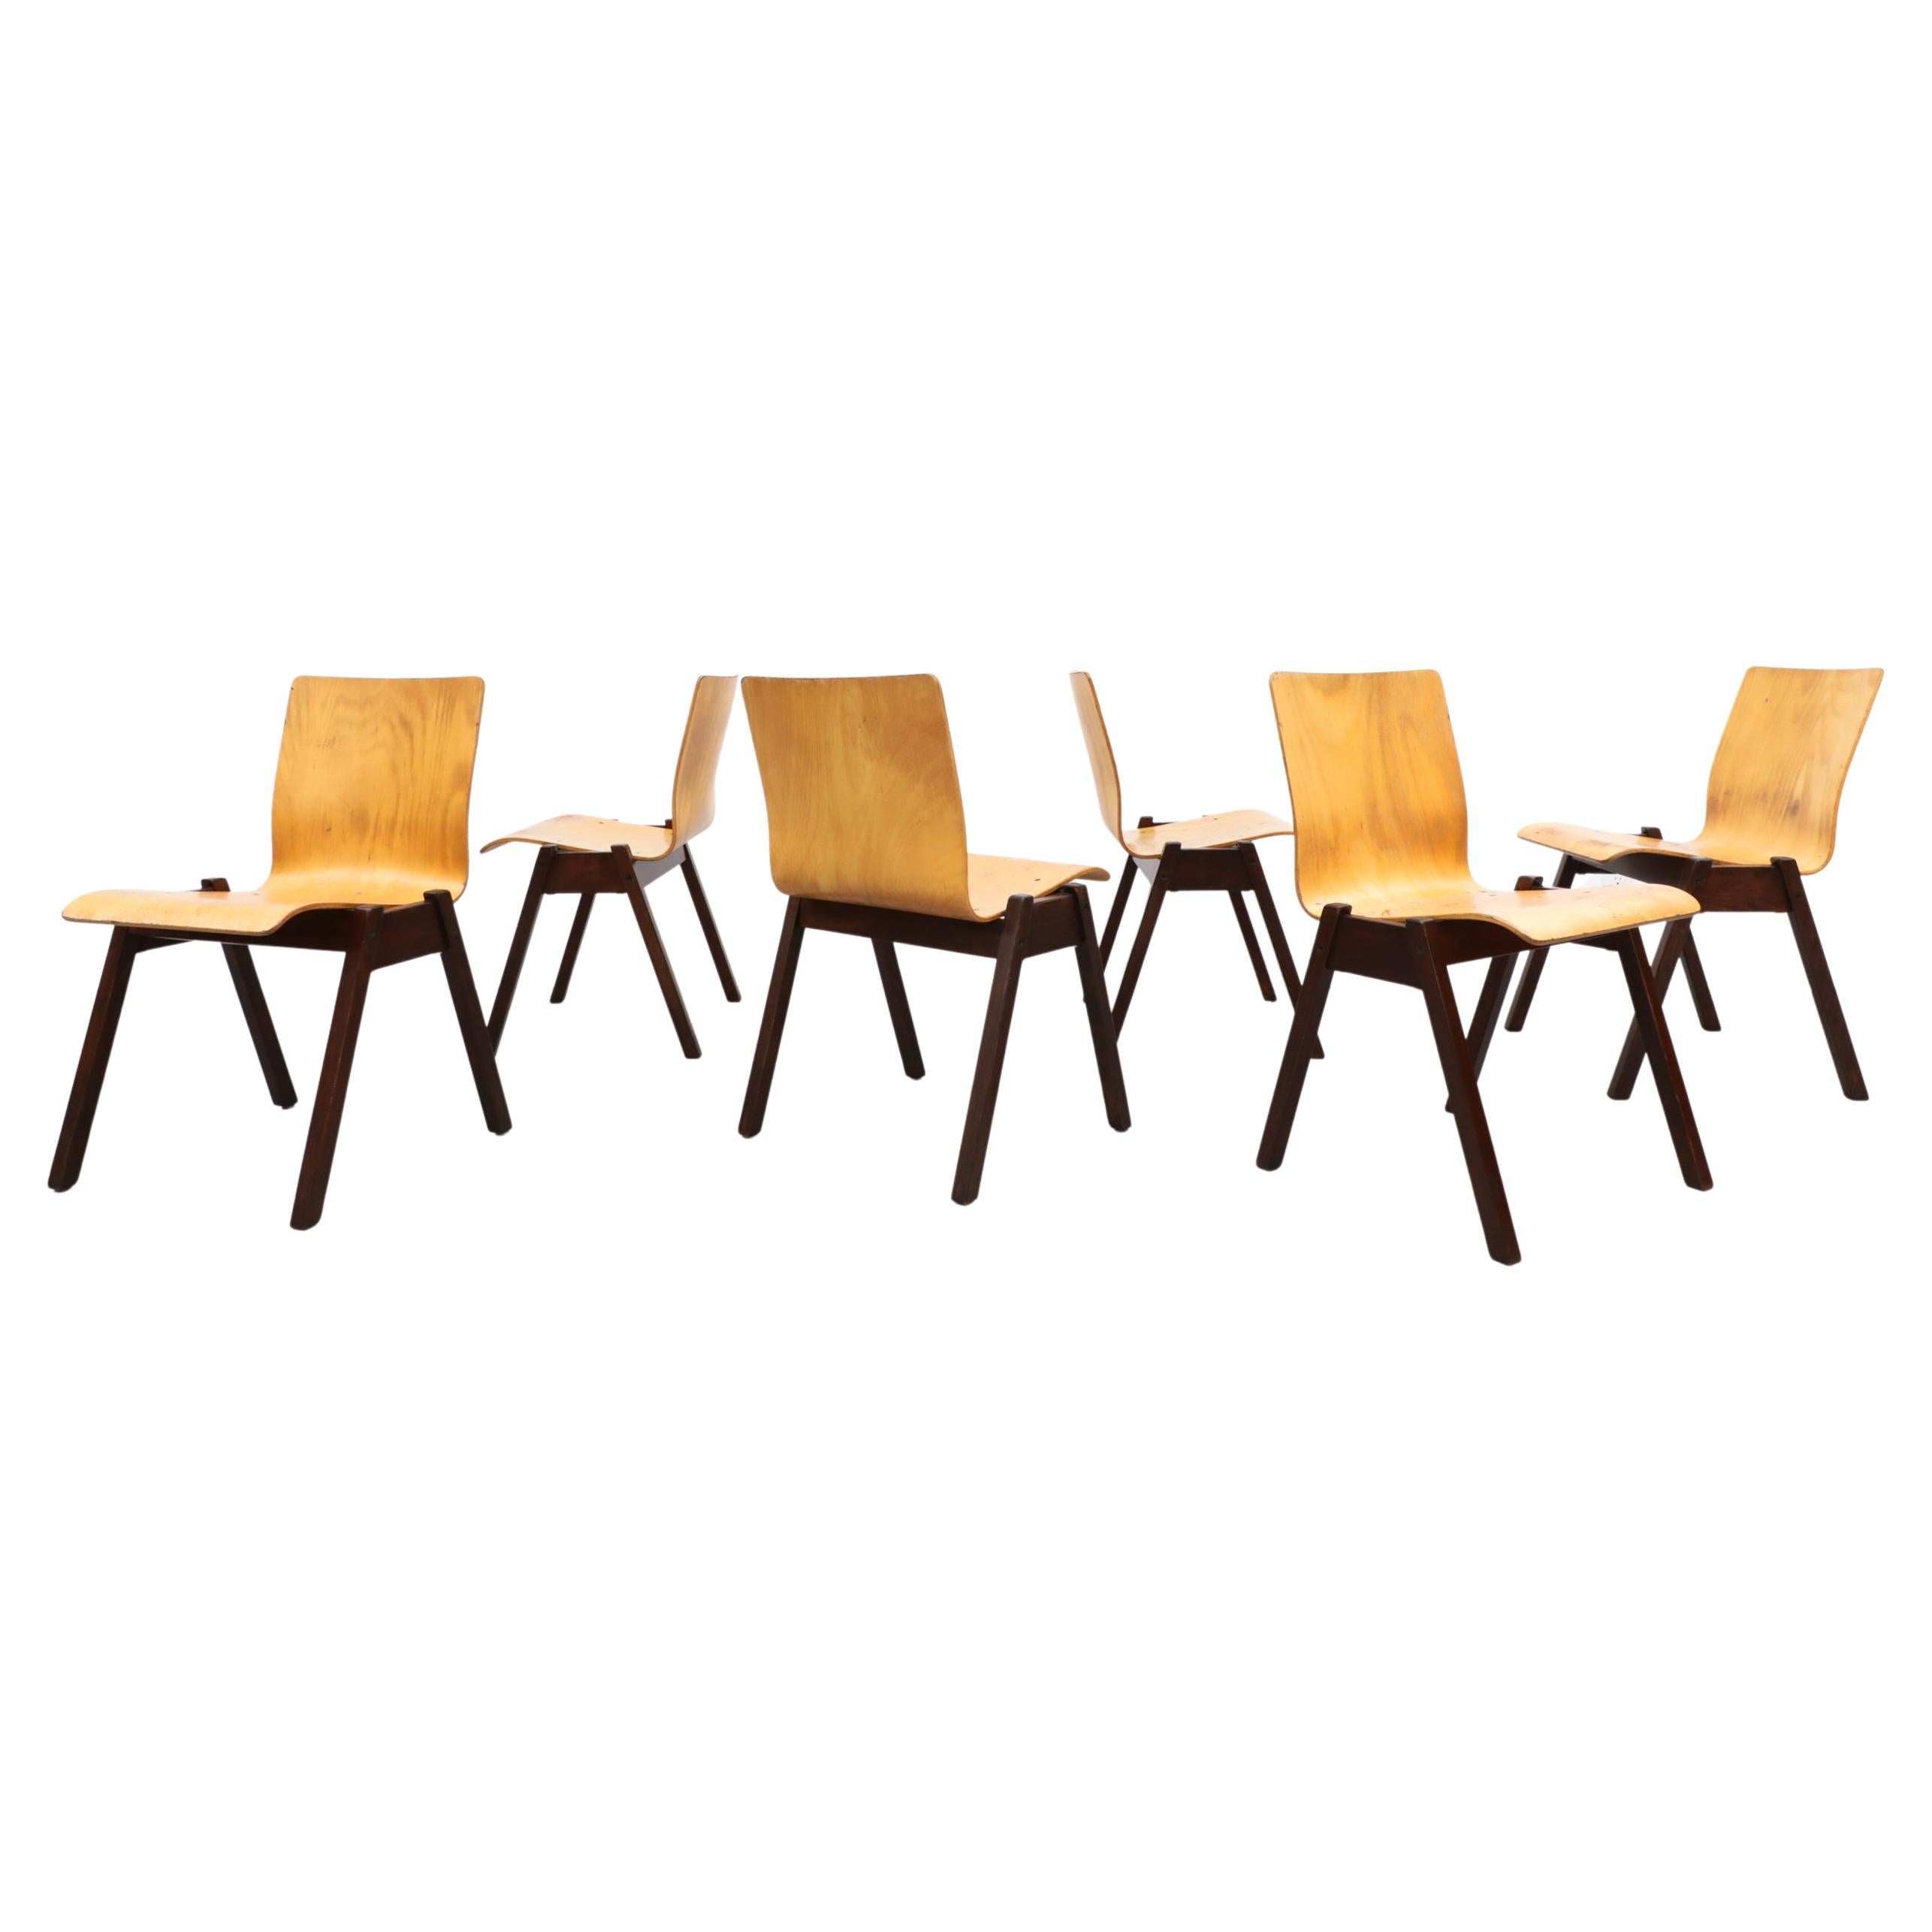 Roland Rainer Style Stacking Chairs